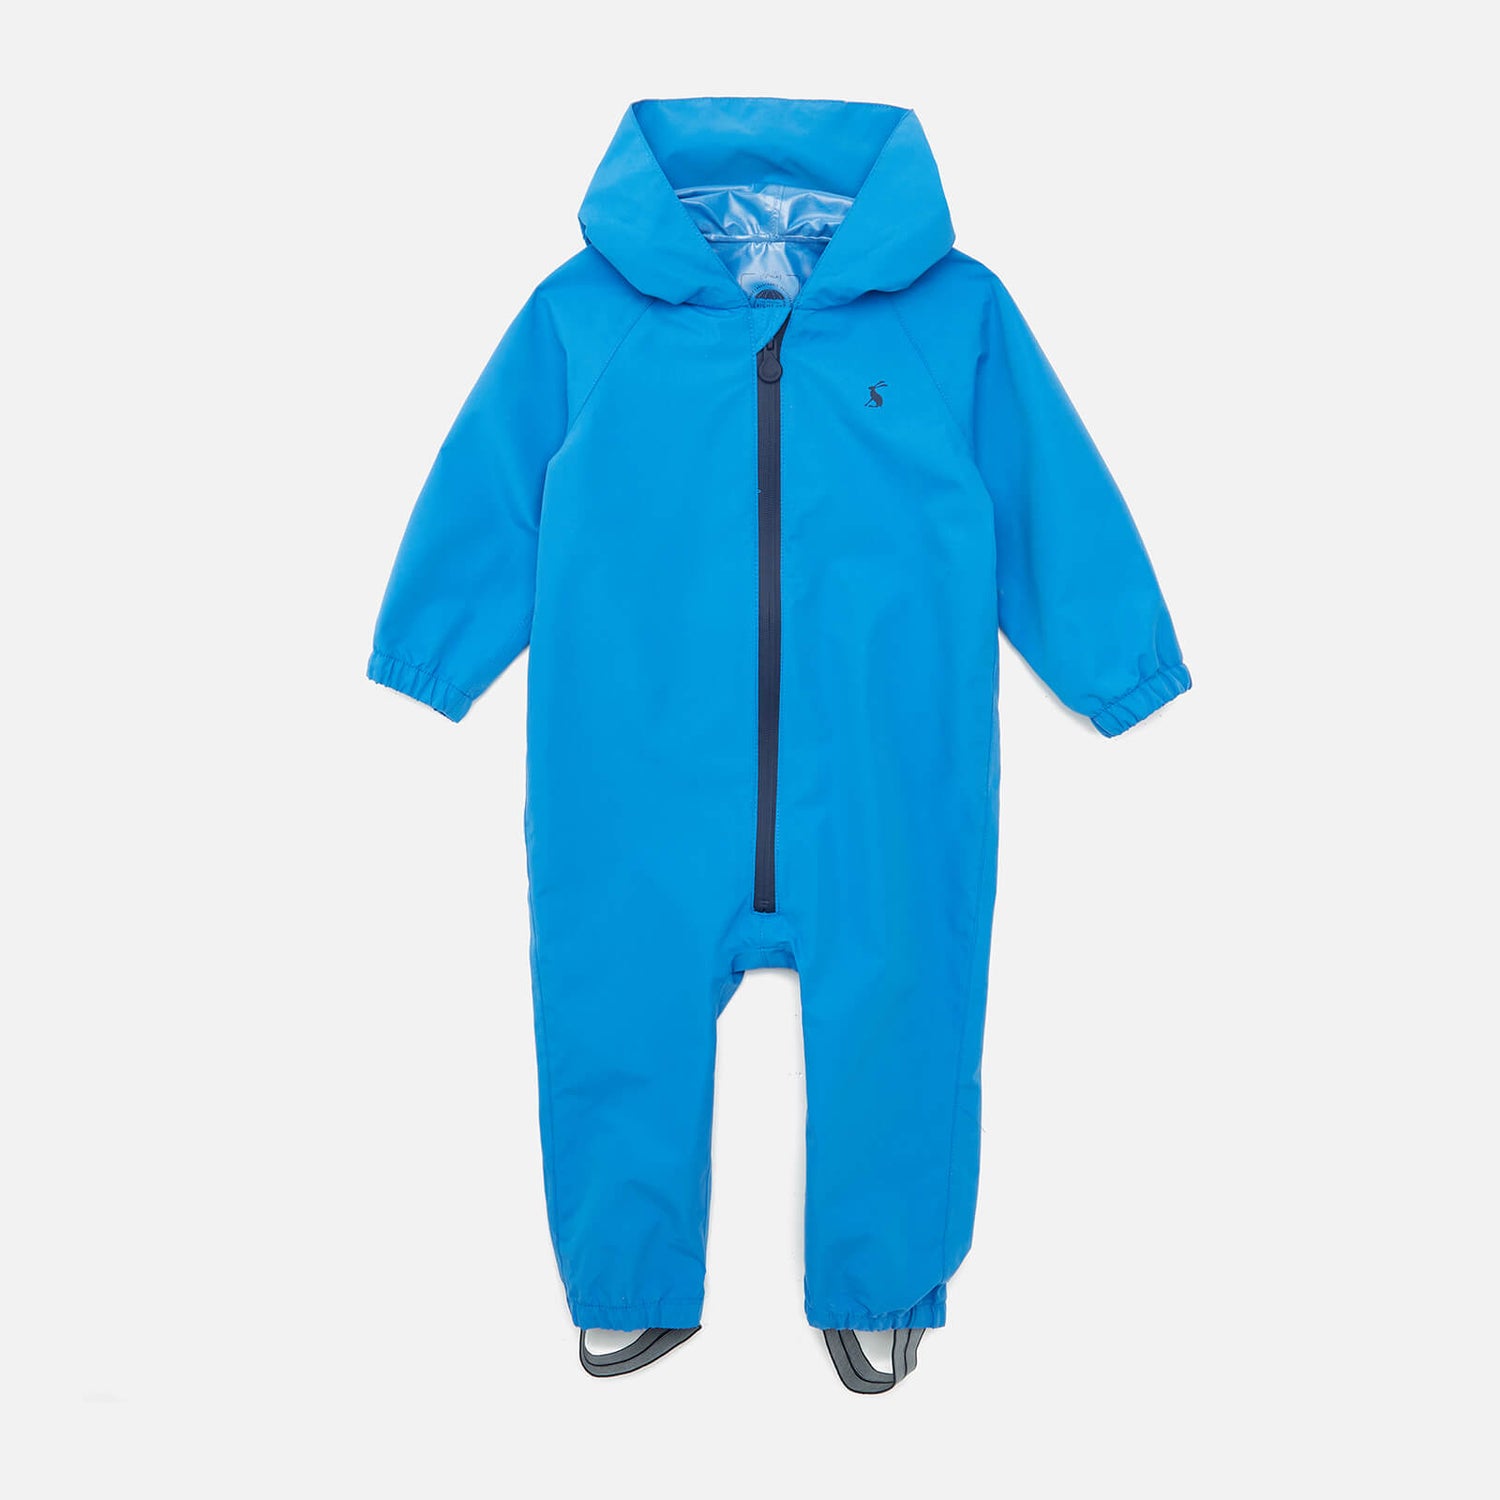 Joules Kids' Waterproof Recycled Character Puddlesuit - Blue Shark - 1 Year